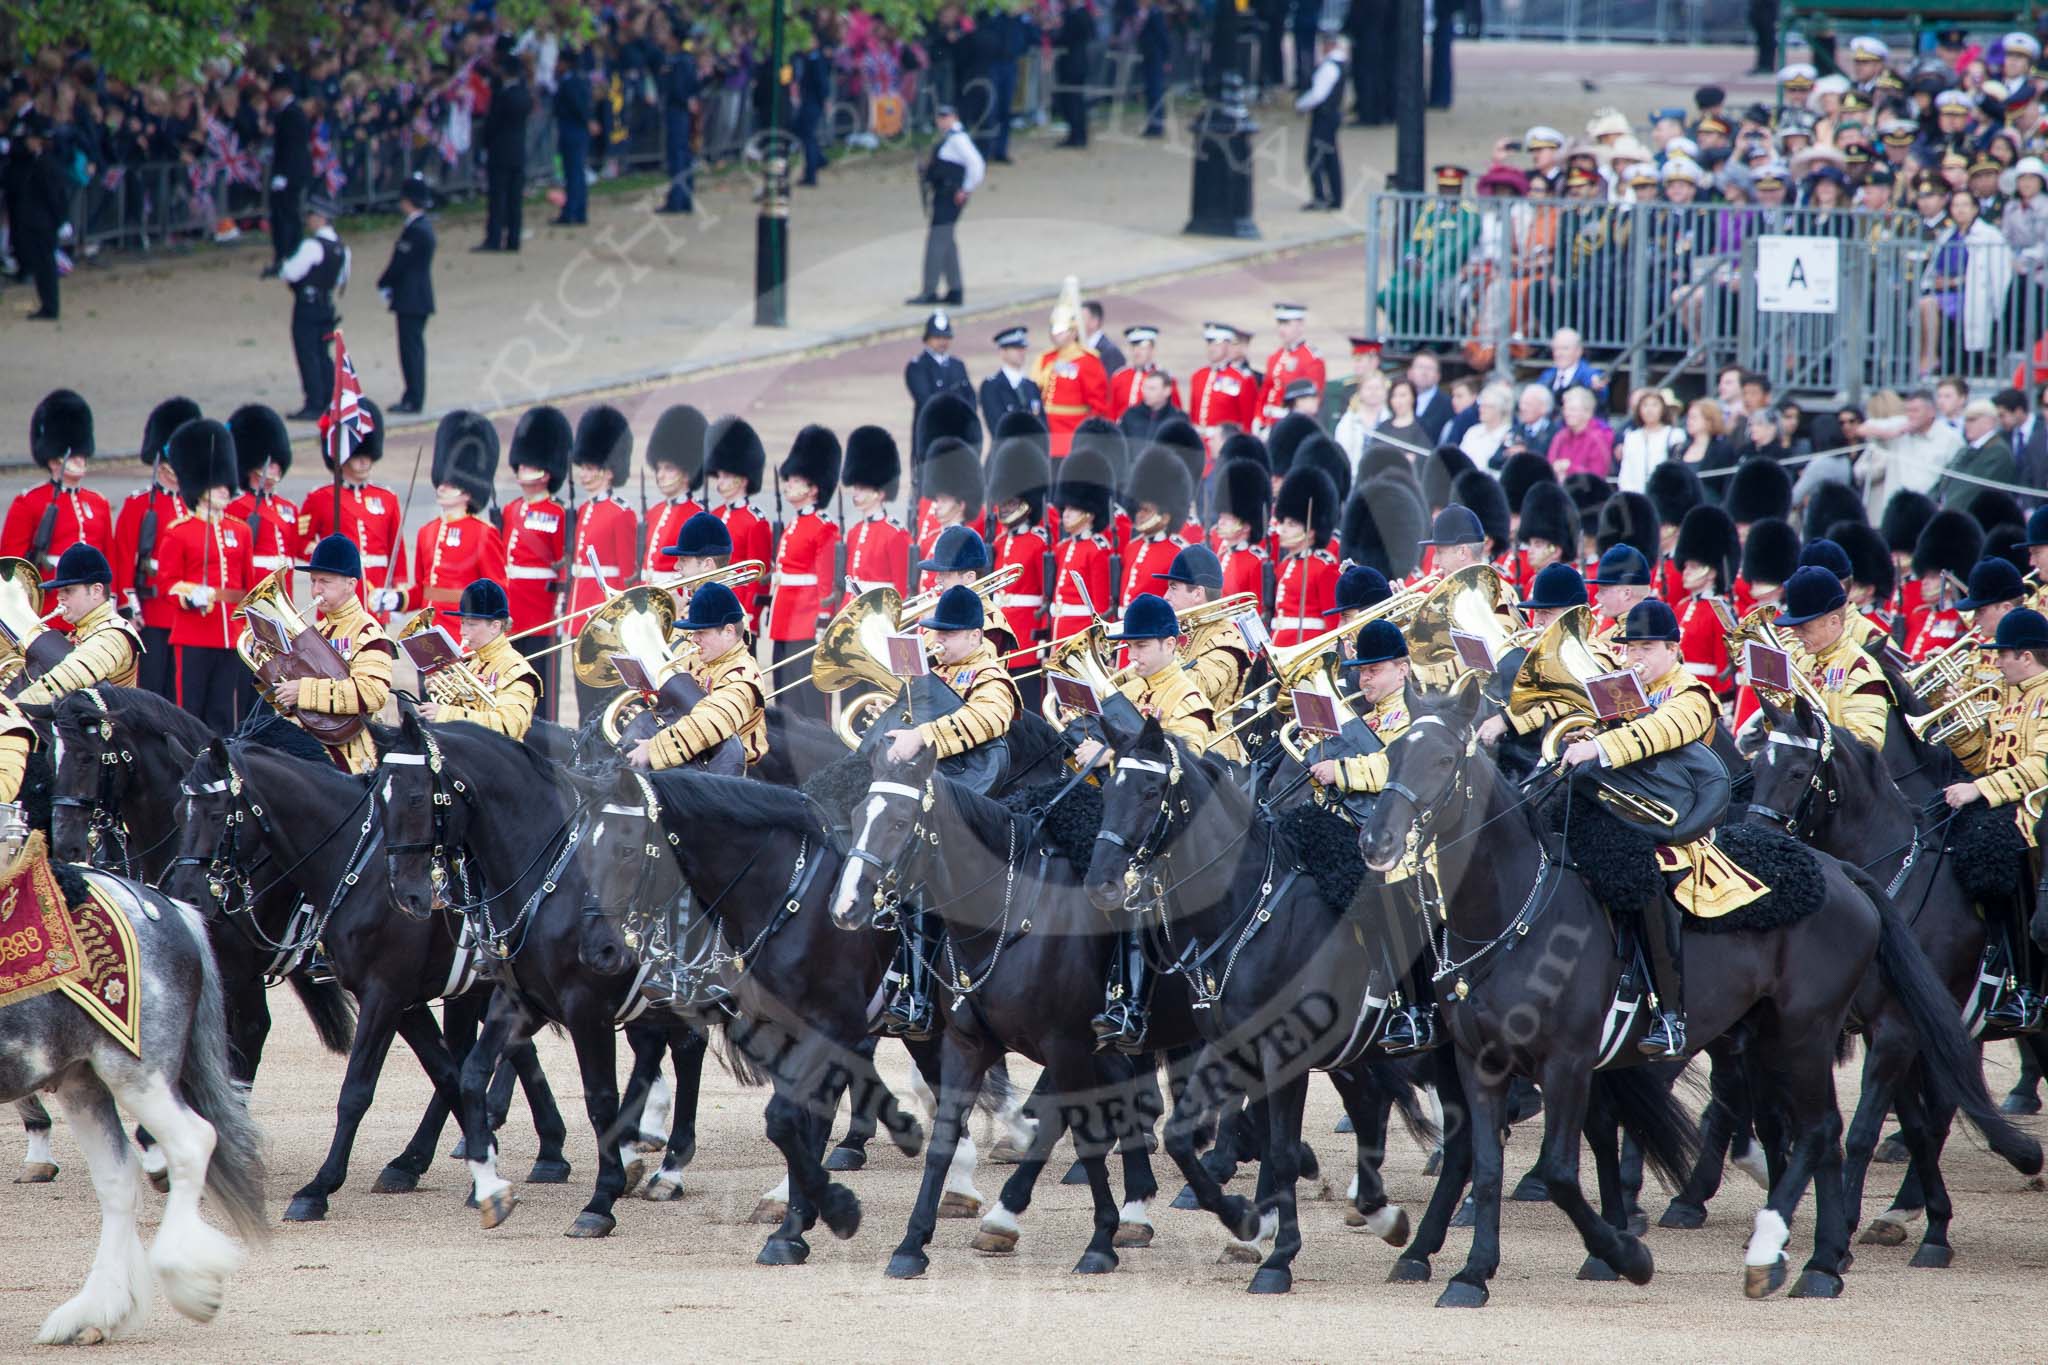 Trooping the Colour 2012: At the beginning of the Ride Past, when The King’s Troop Royal Horse Artillery moves onto the western side of Horse Guards Parade, the Mounted Bands of the Household Cavalry come from the eastern side onto the parade ground..
Horse Guards Parade, Westminster,
London SW1,

United Kingdom,
on 16 June 2012 at 11:53, image #530